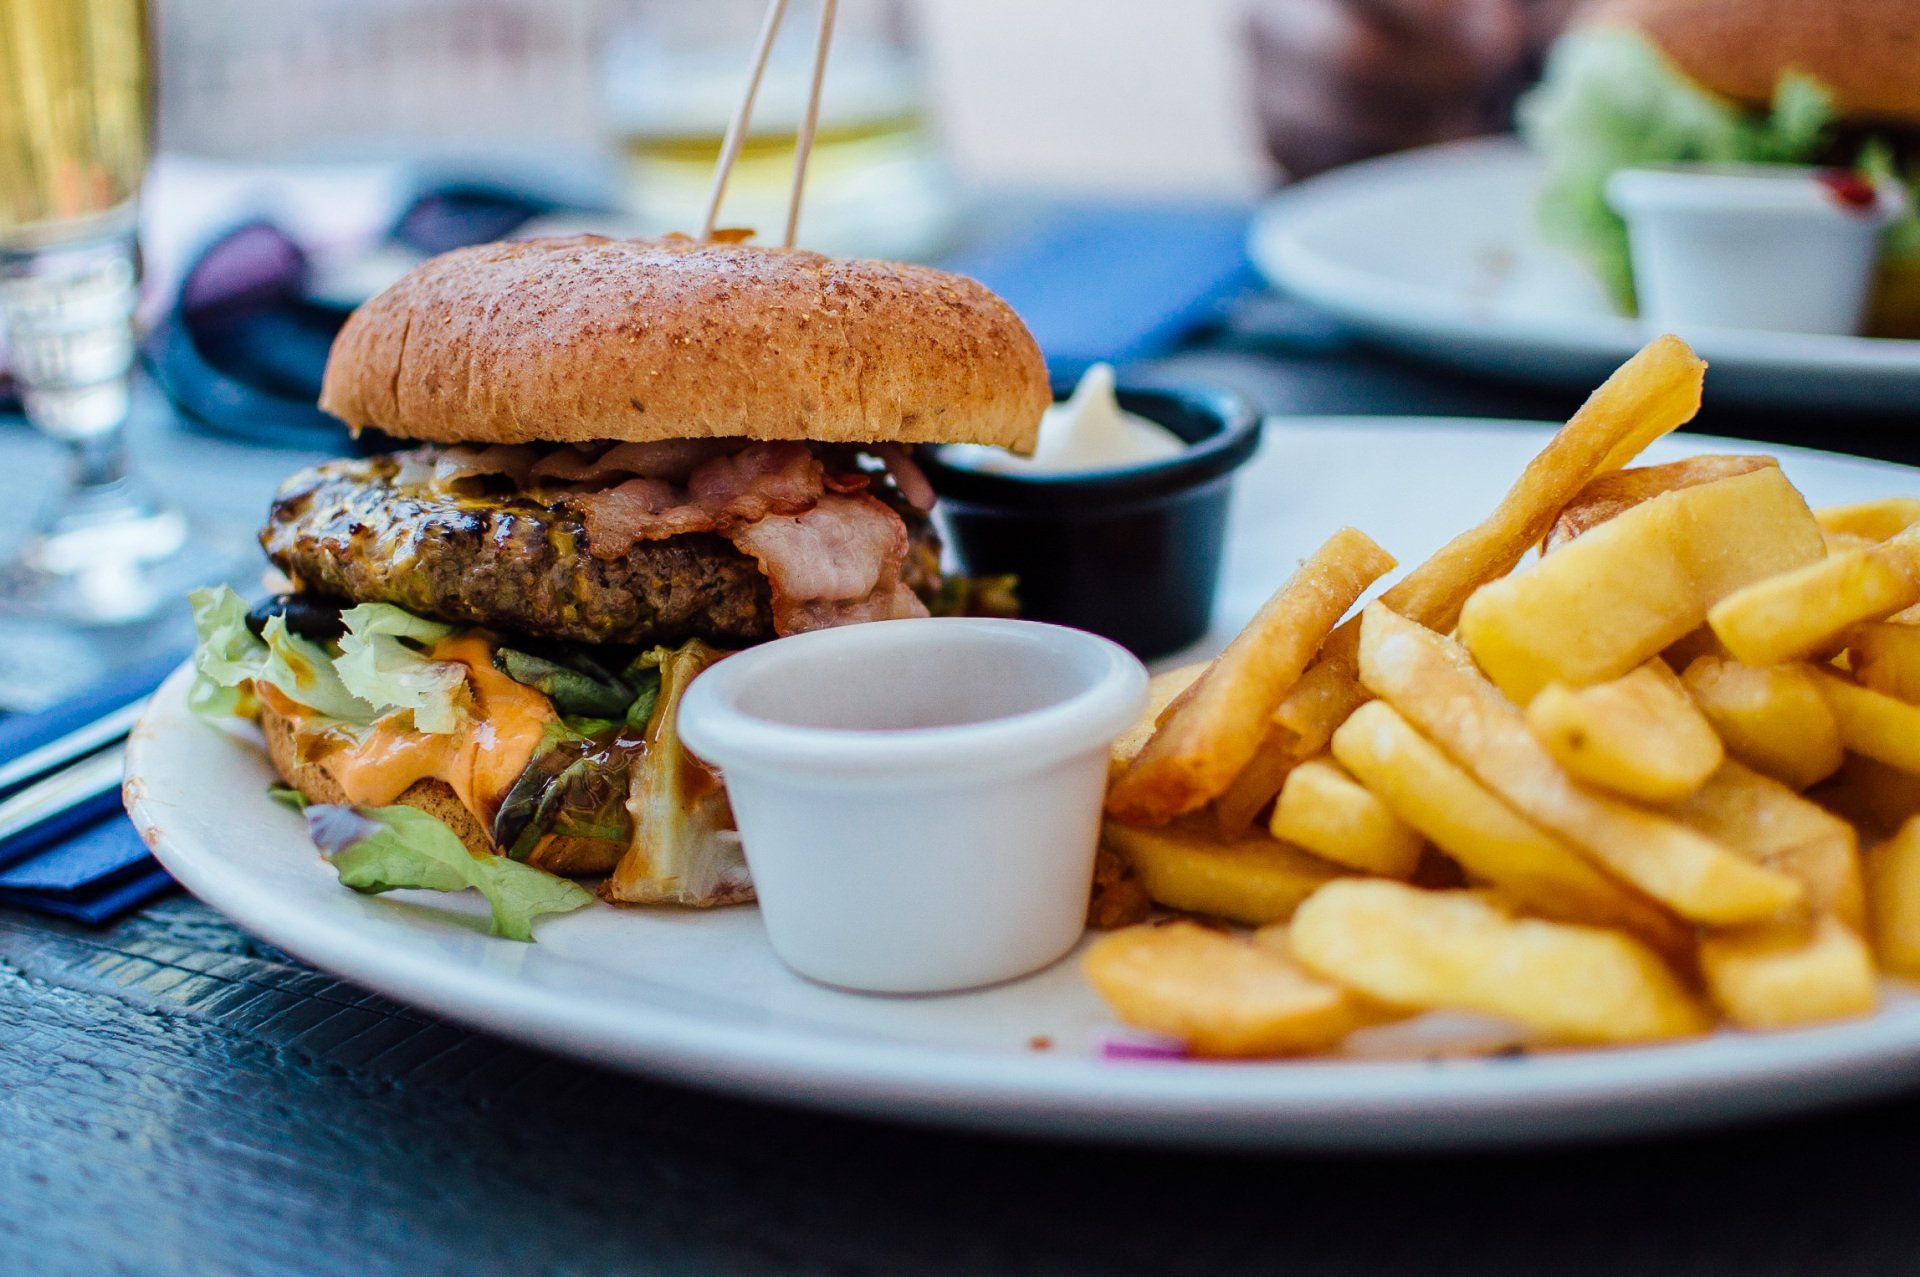 a plate of food with a hamburger and french fries on a table .